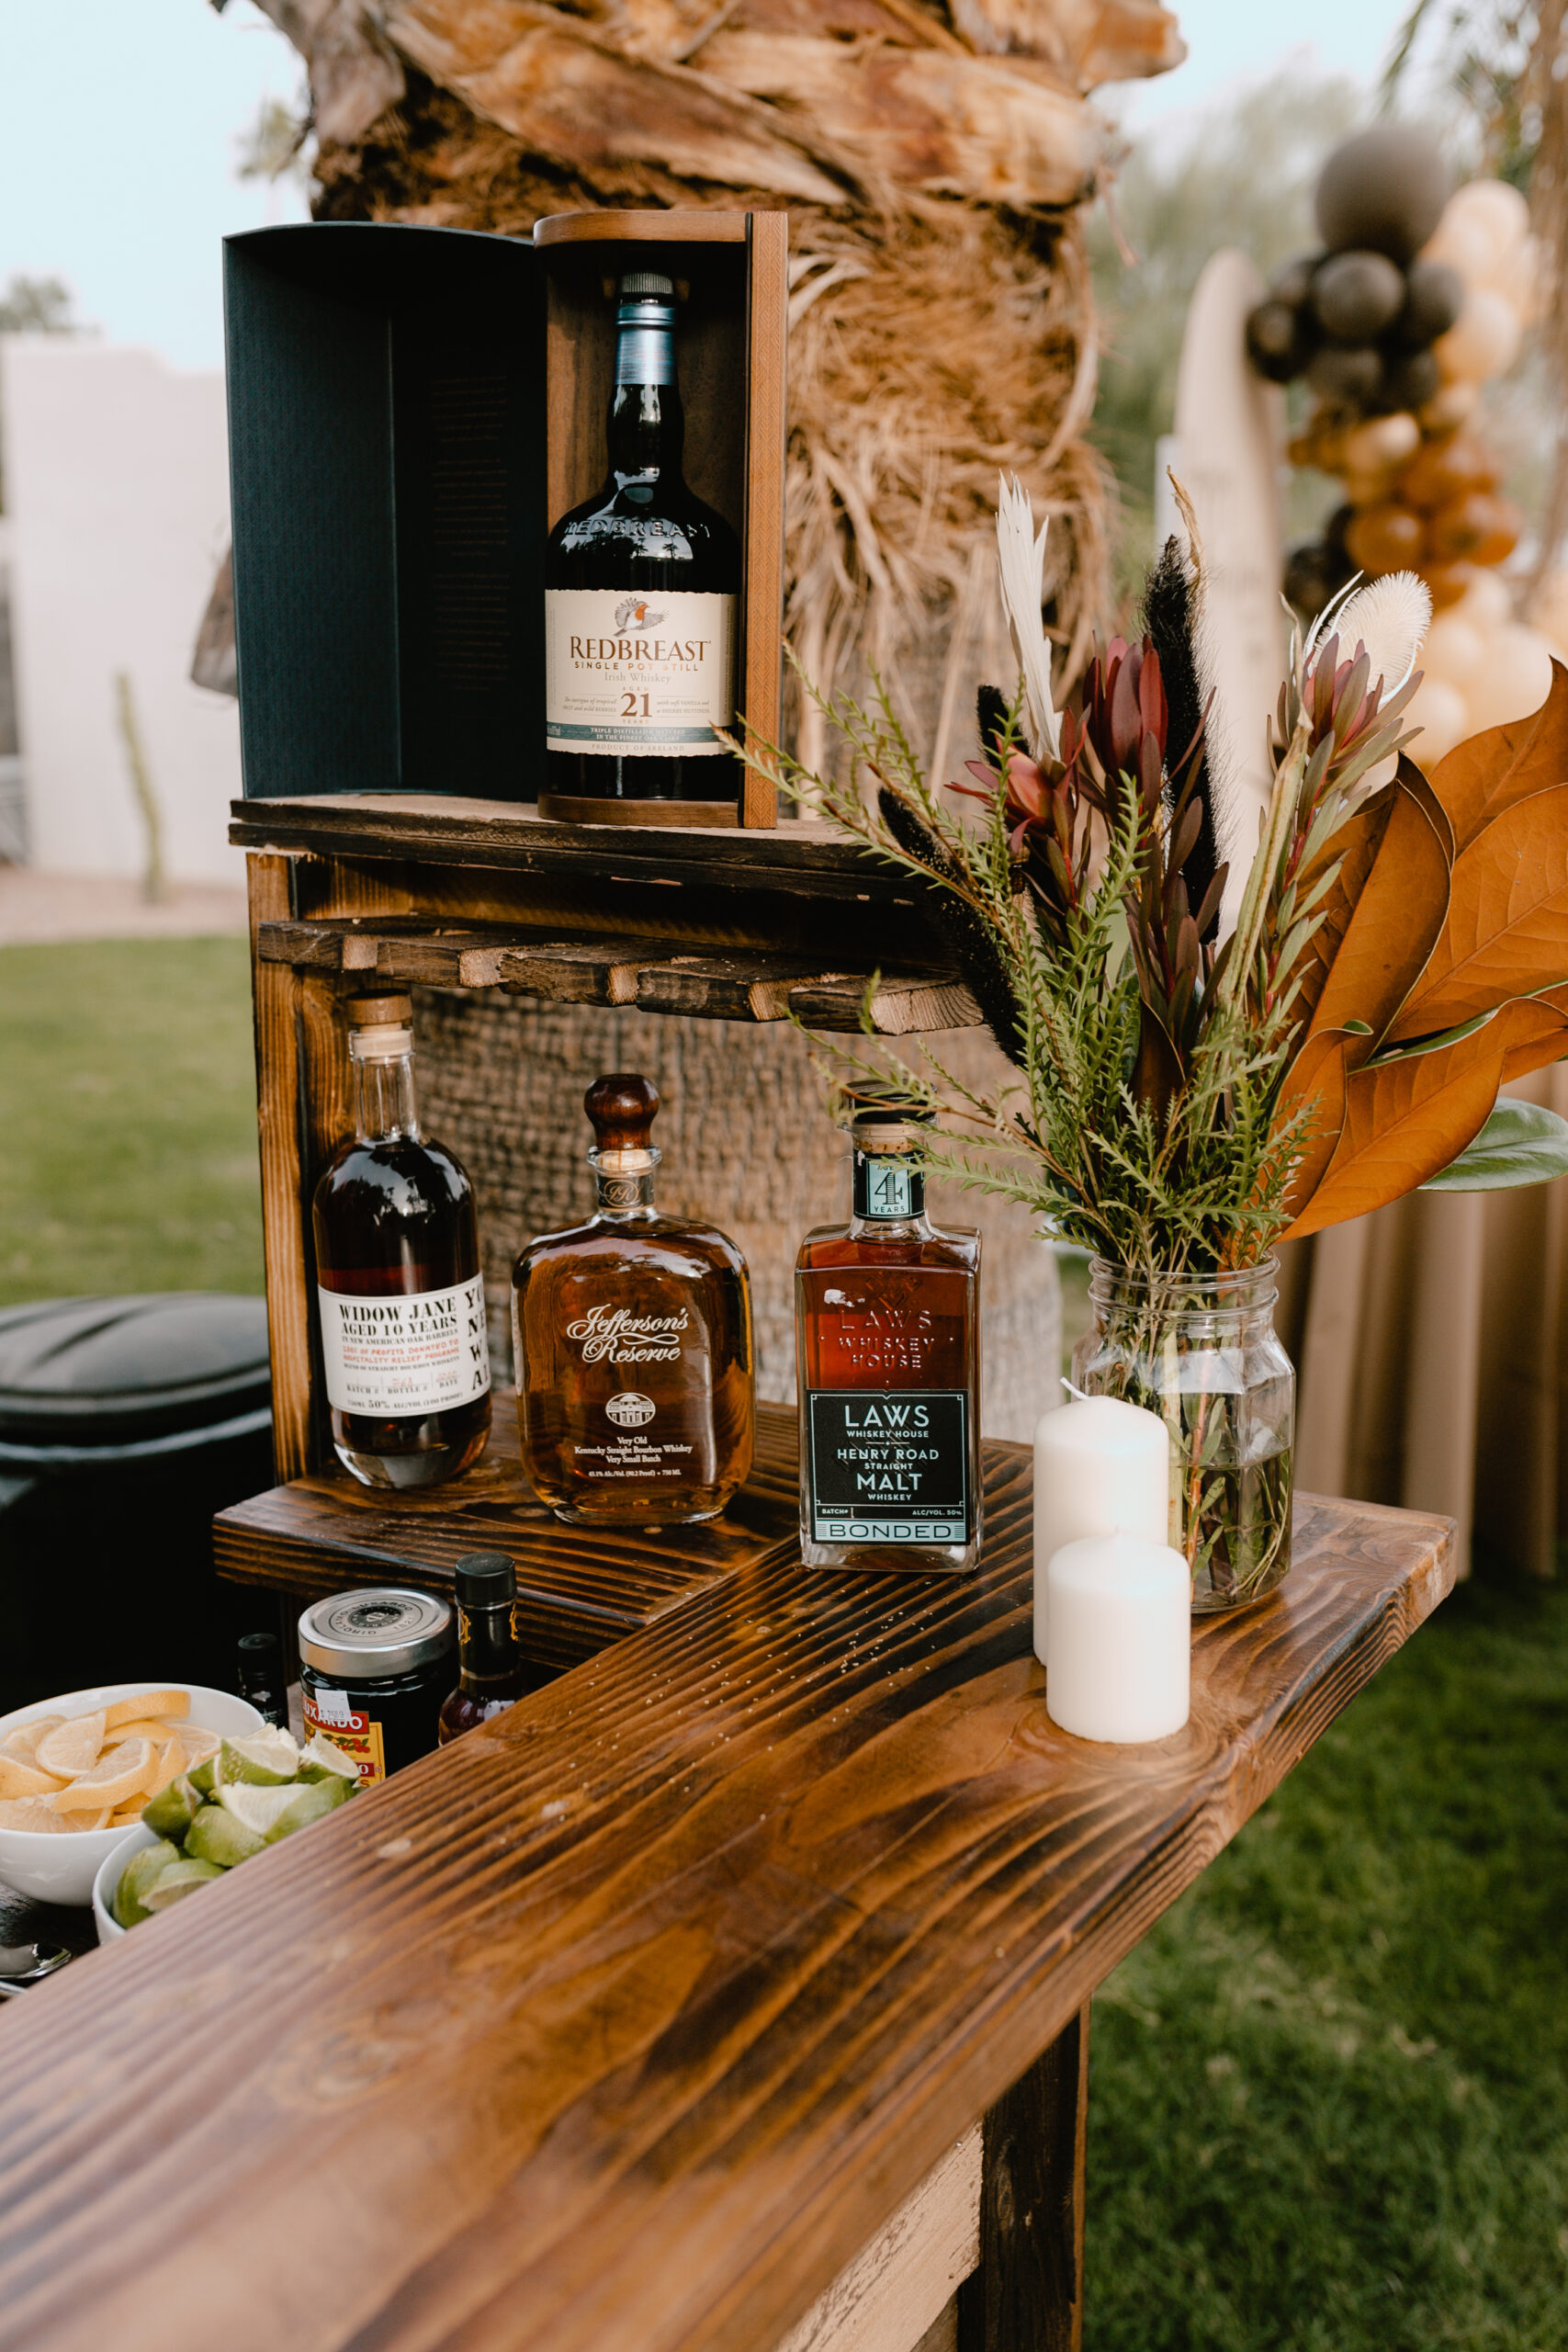 whiskey for the whiskey tasting at this themed 40th birthday party #thelovedesignedlife #40thbirthday #partyideas